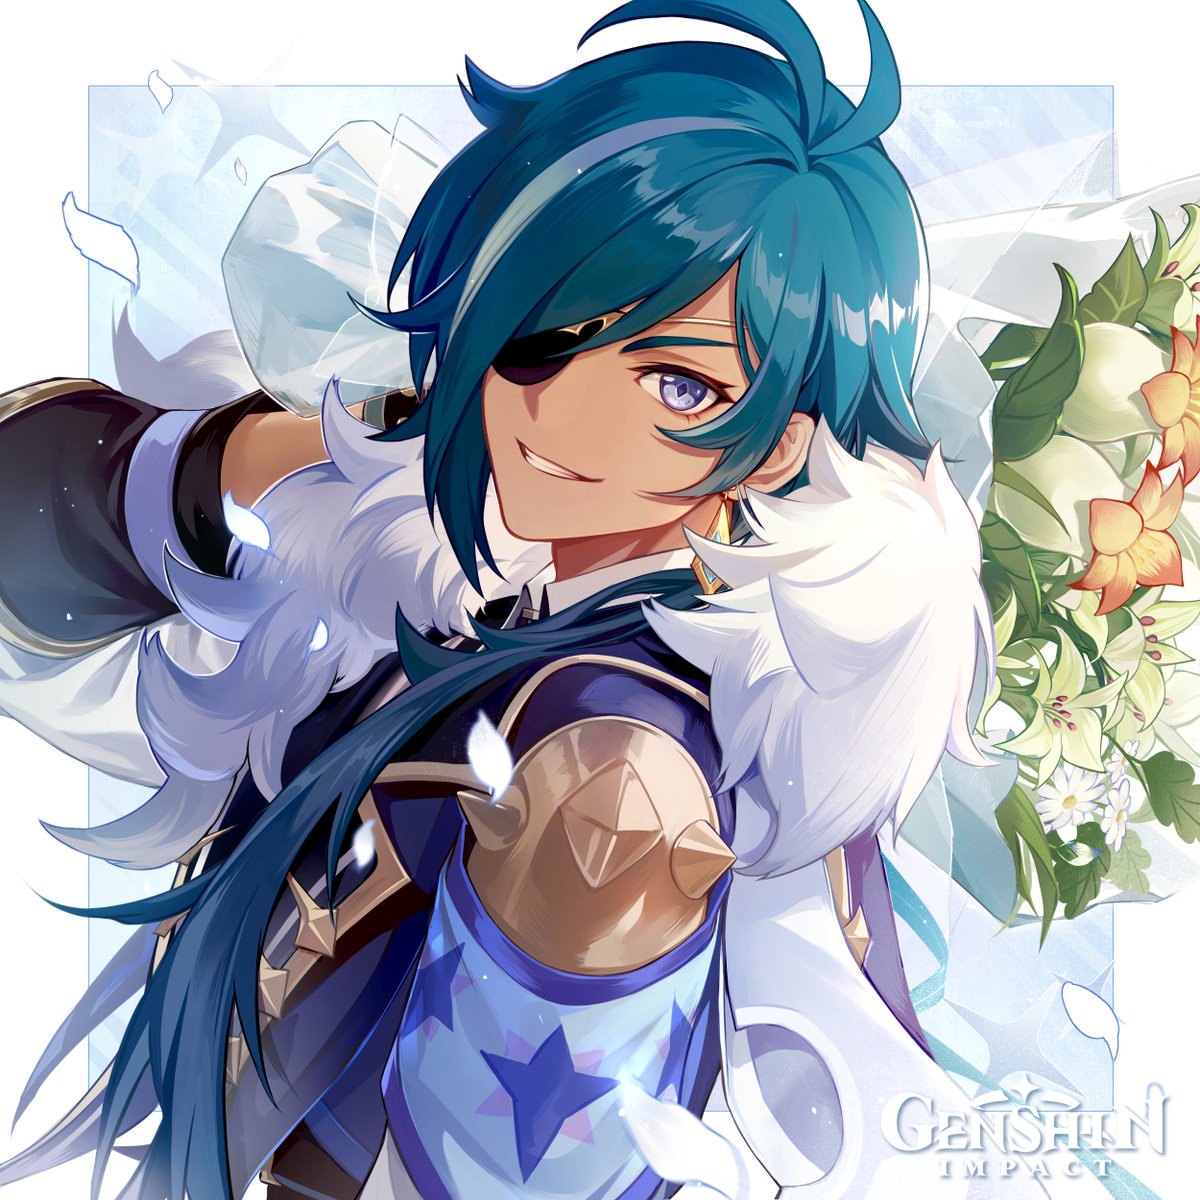 It's so rare to receive a bouquet for my birthday. You carefully picked it out, right? Thanks a bunch!

While it's still light out, would you like to go for a stroll with me?

And later... Haha, you know me, let's head to the tavern?

#GenshinImpact #Kaeya